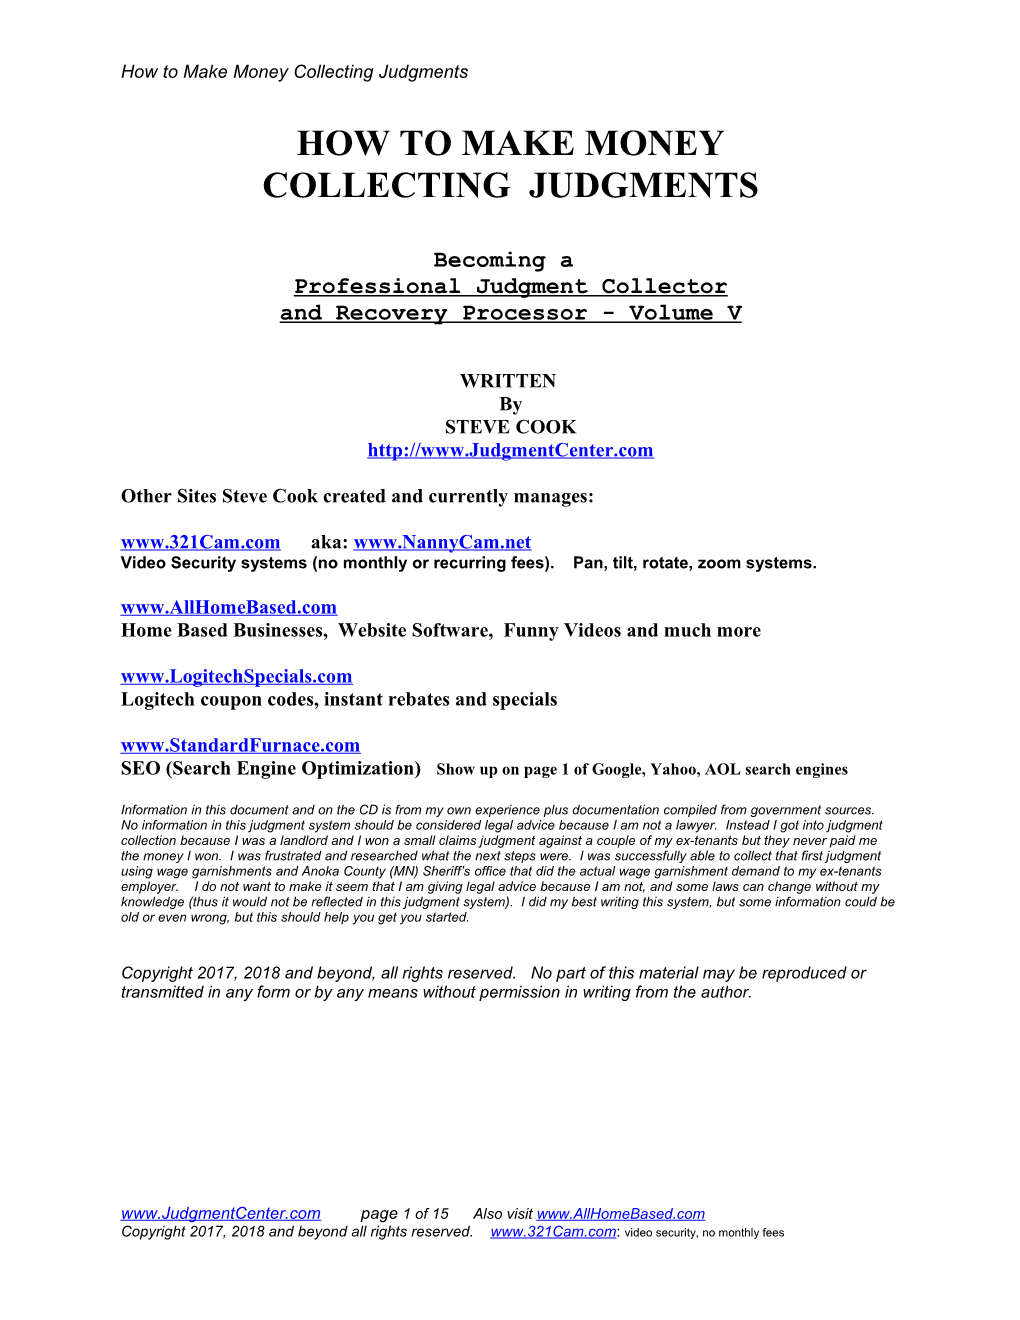 How to Make a Fortune Processing Judicial Judgments